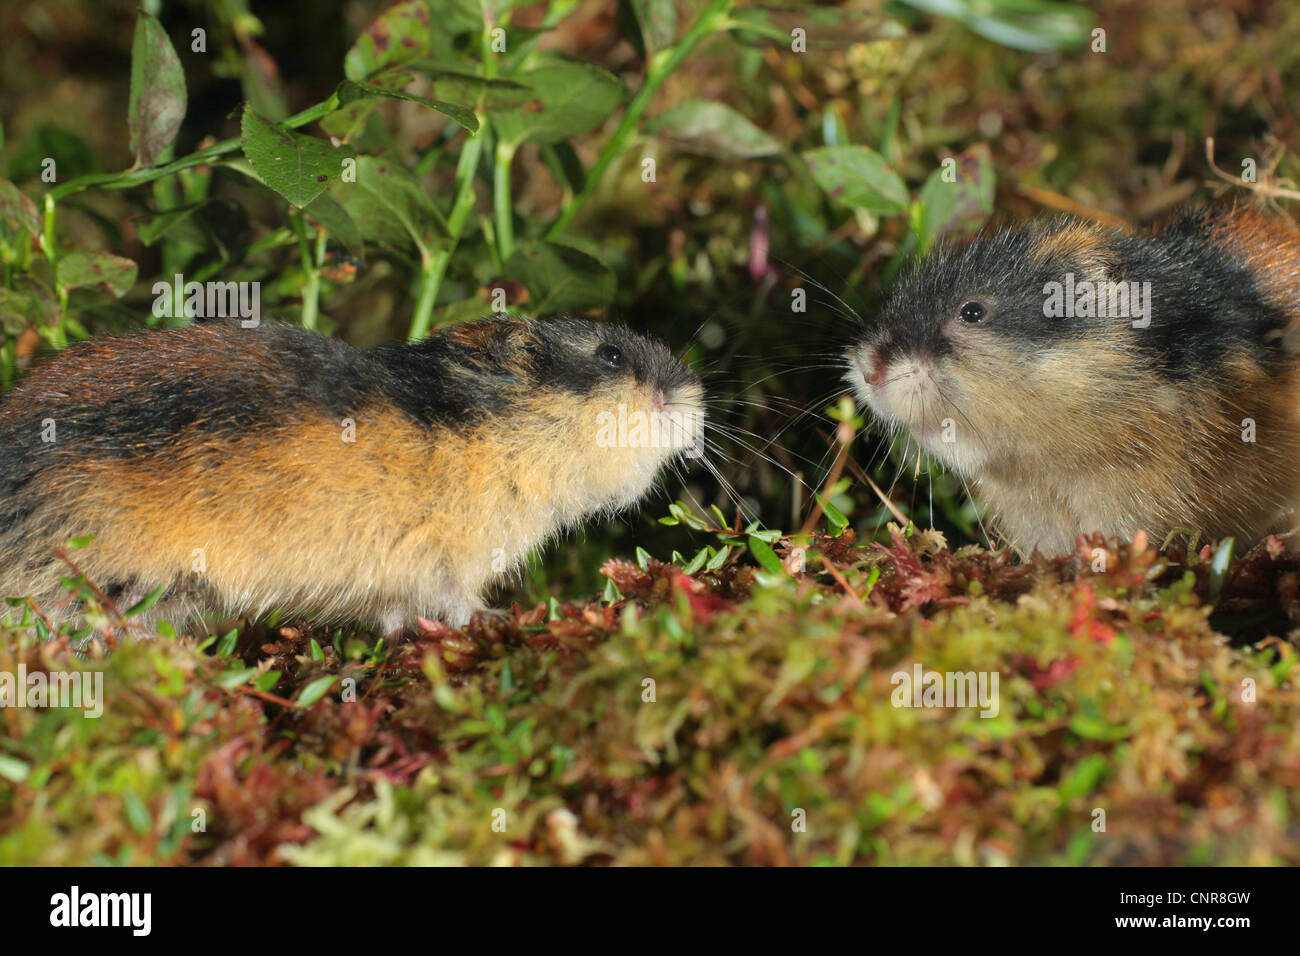 Norway lemming (Lemmus lemmus), two individuals sniffing at each other, Norway Stock Photo